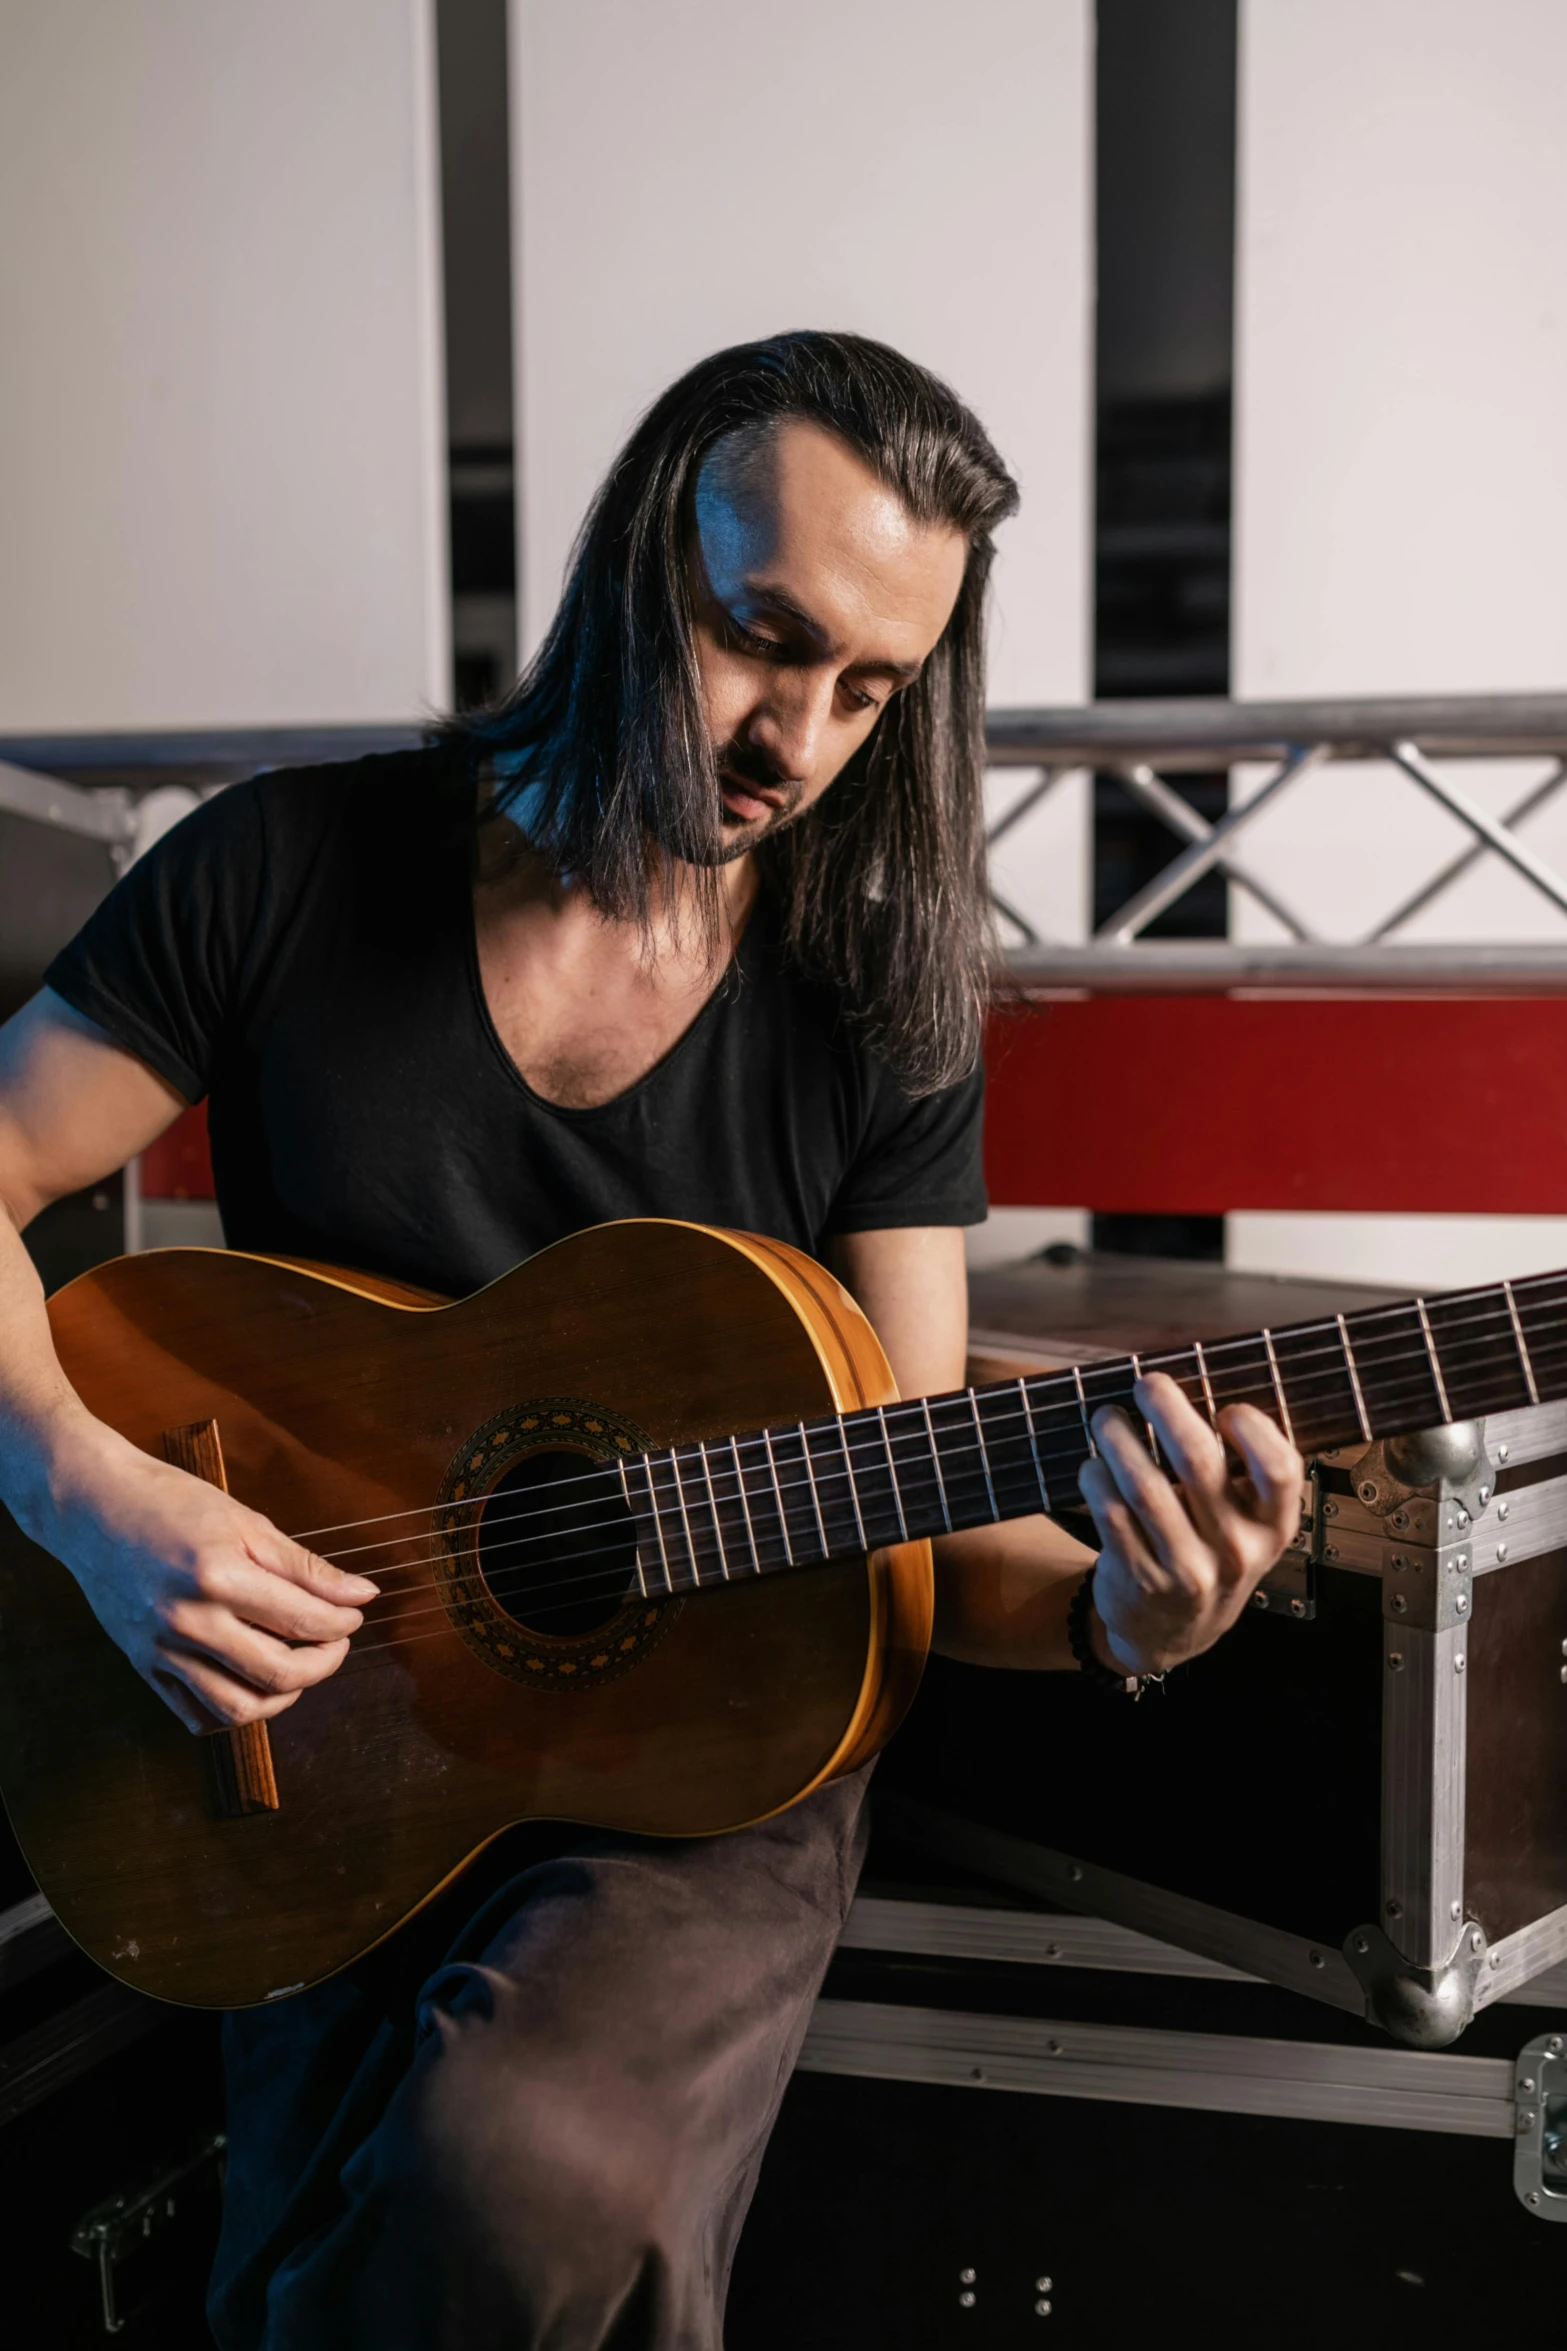 a man with long hair playing a guitar, antipodeans, looking off to the side, edin durmisevic, in a workshop, avatar image